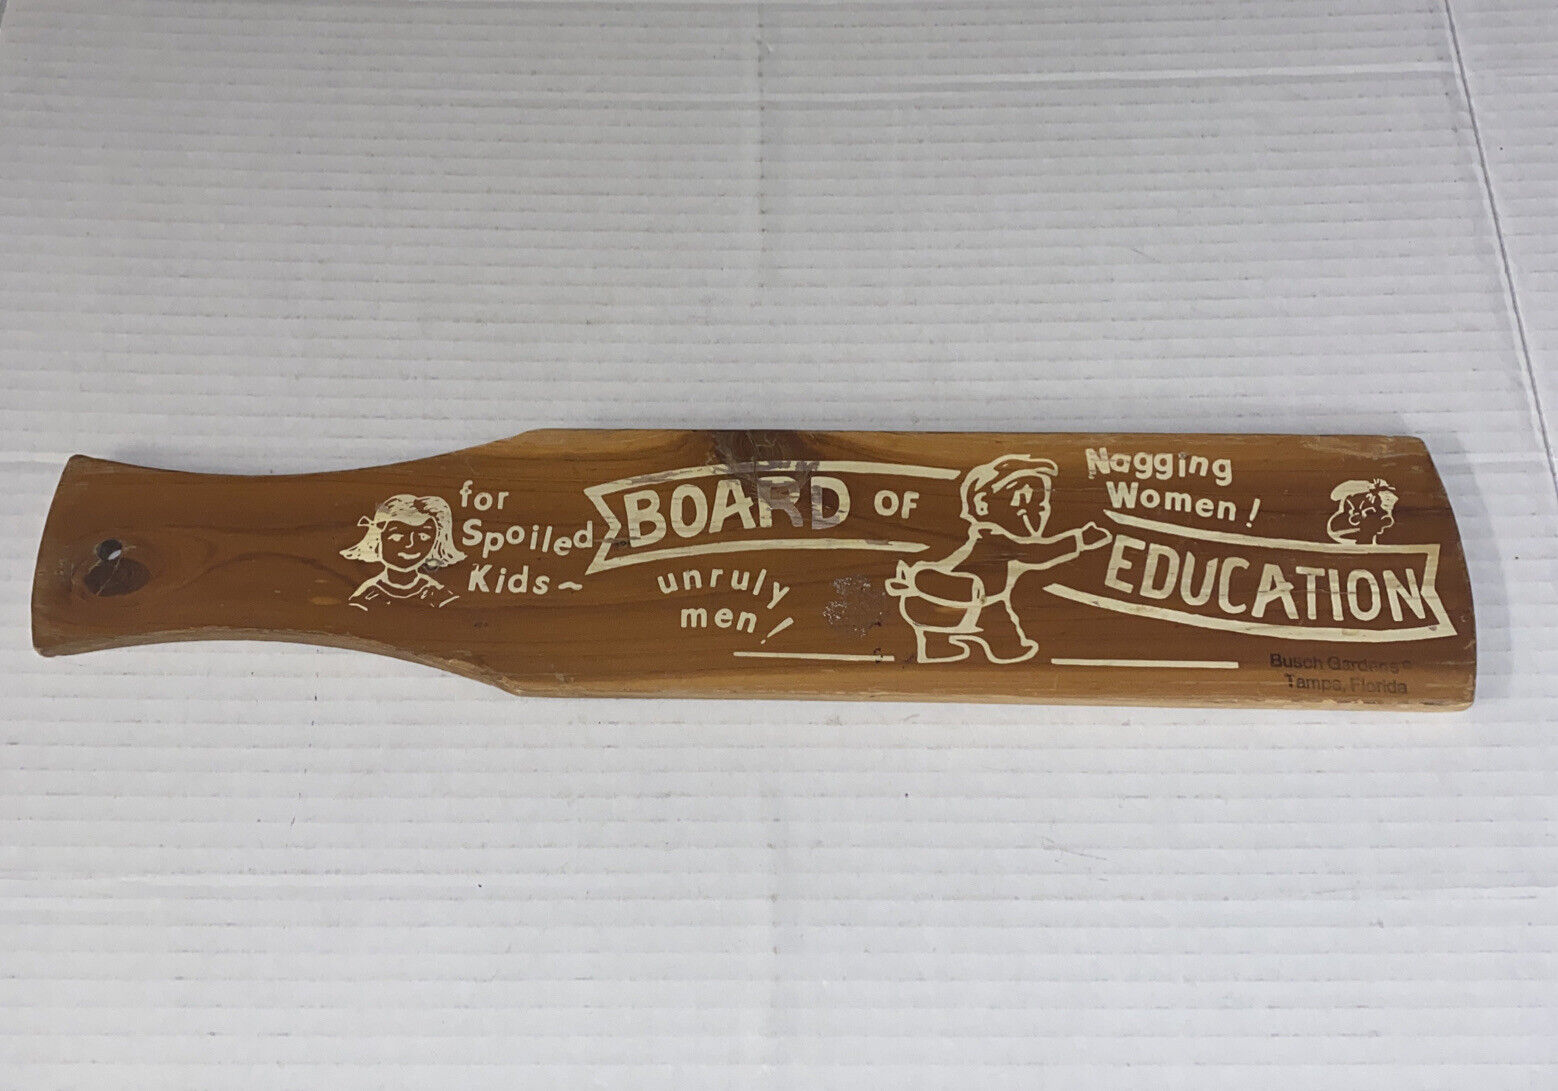 Vintage Novelty Spanking Wood Paddle Busch Gardens Souvenir Board of Education